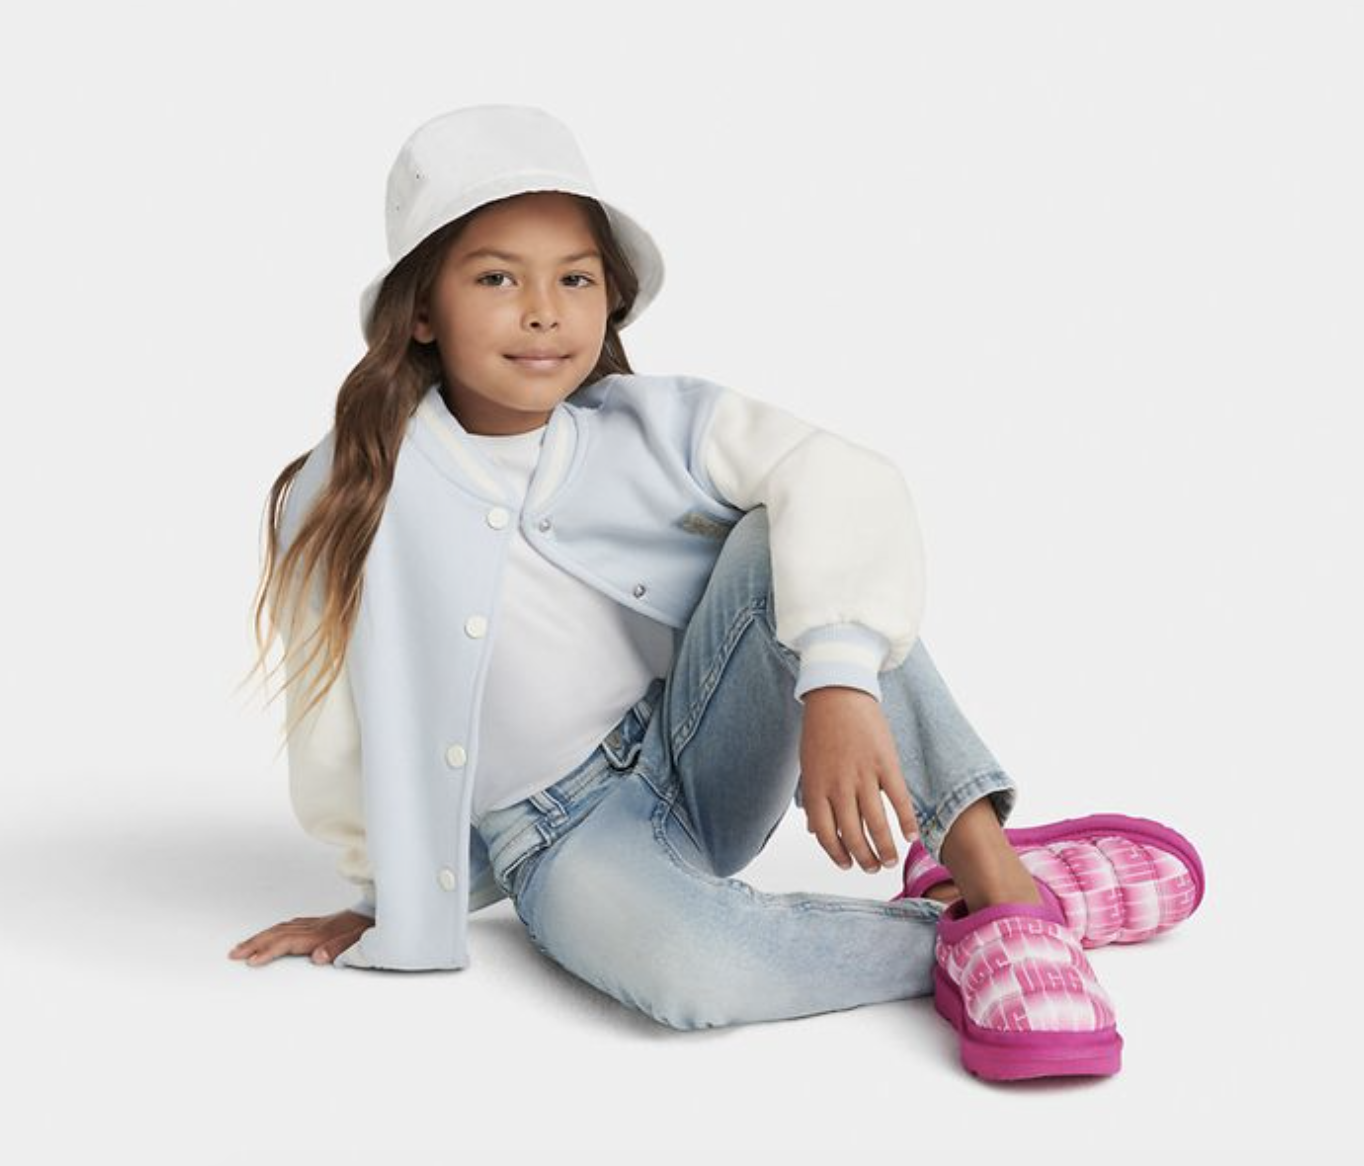 Save on UGGs kids boots and other styles. 